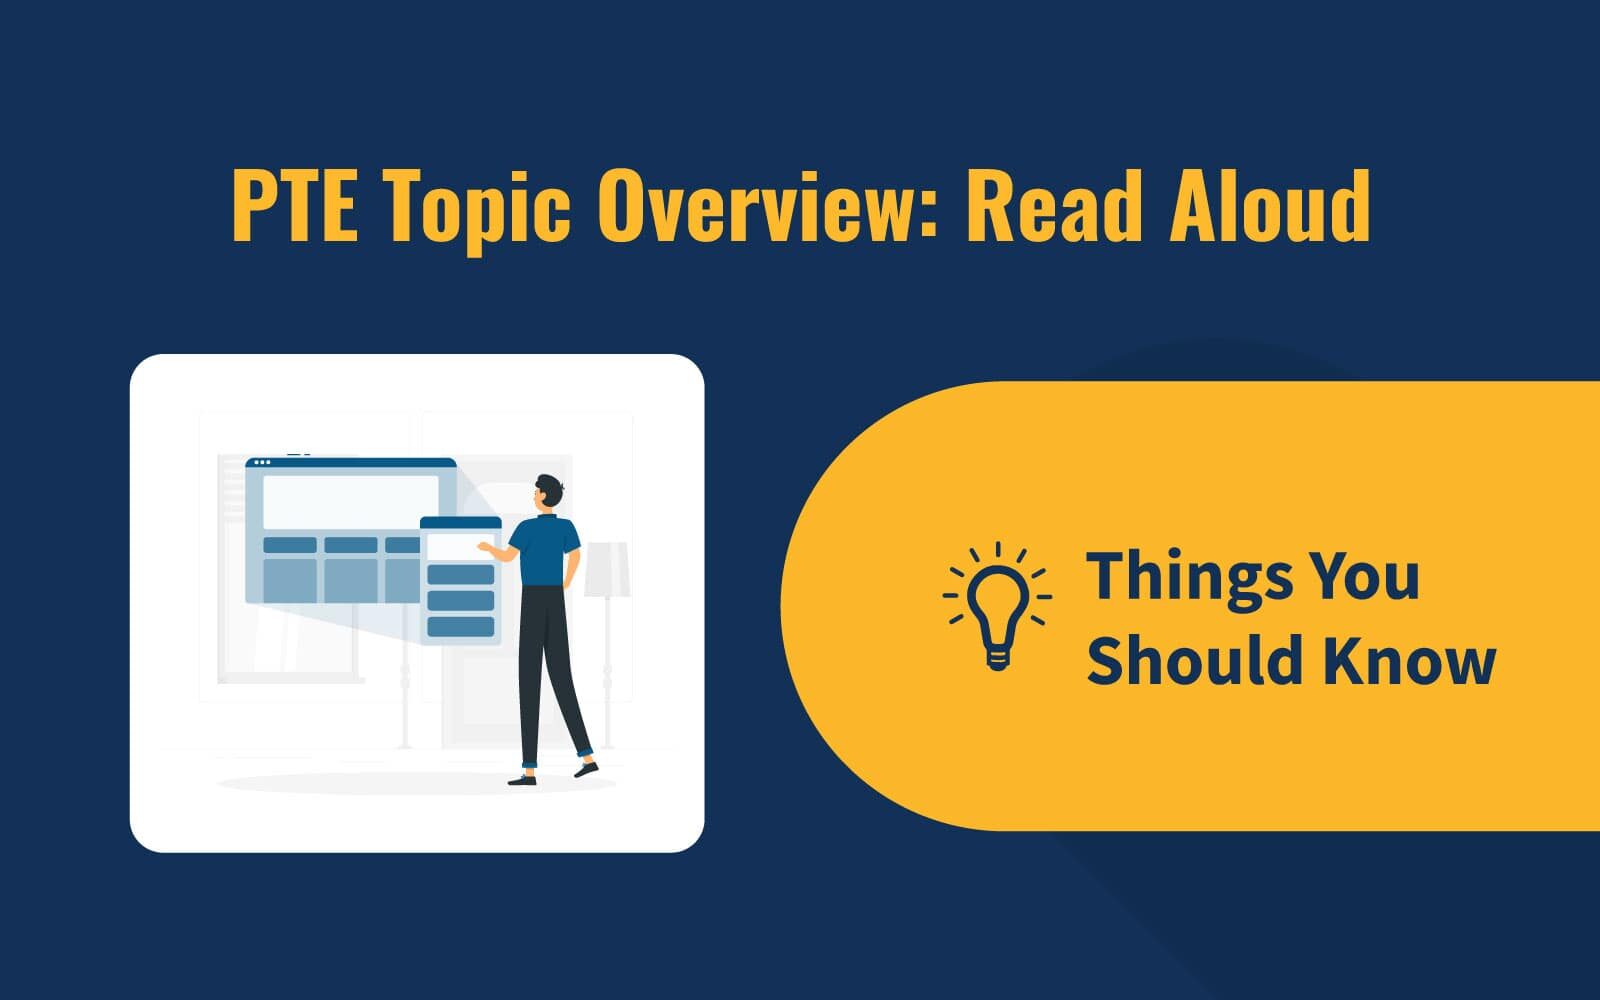 PTE Topic Overview: Read Aloud